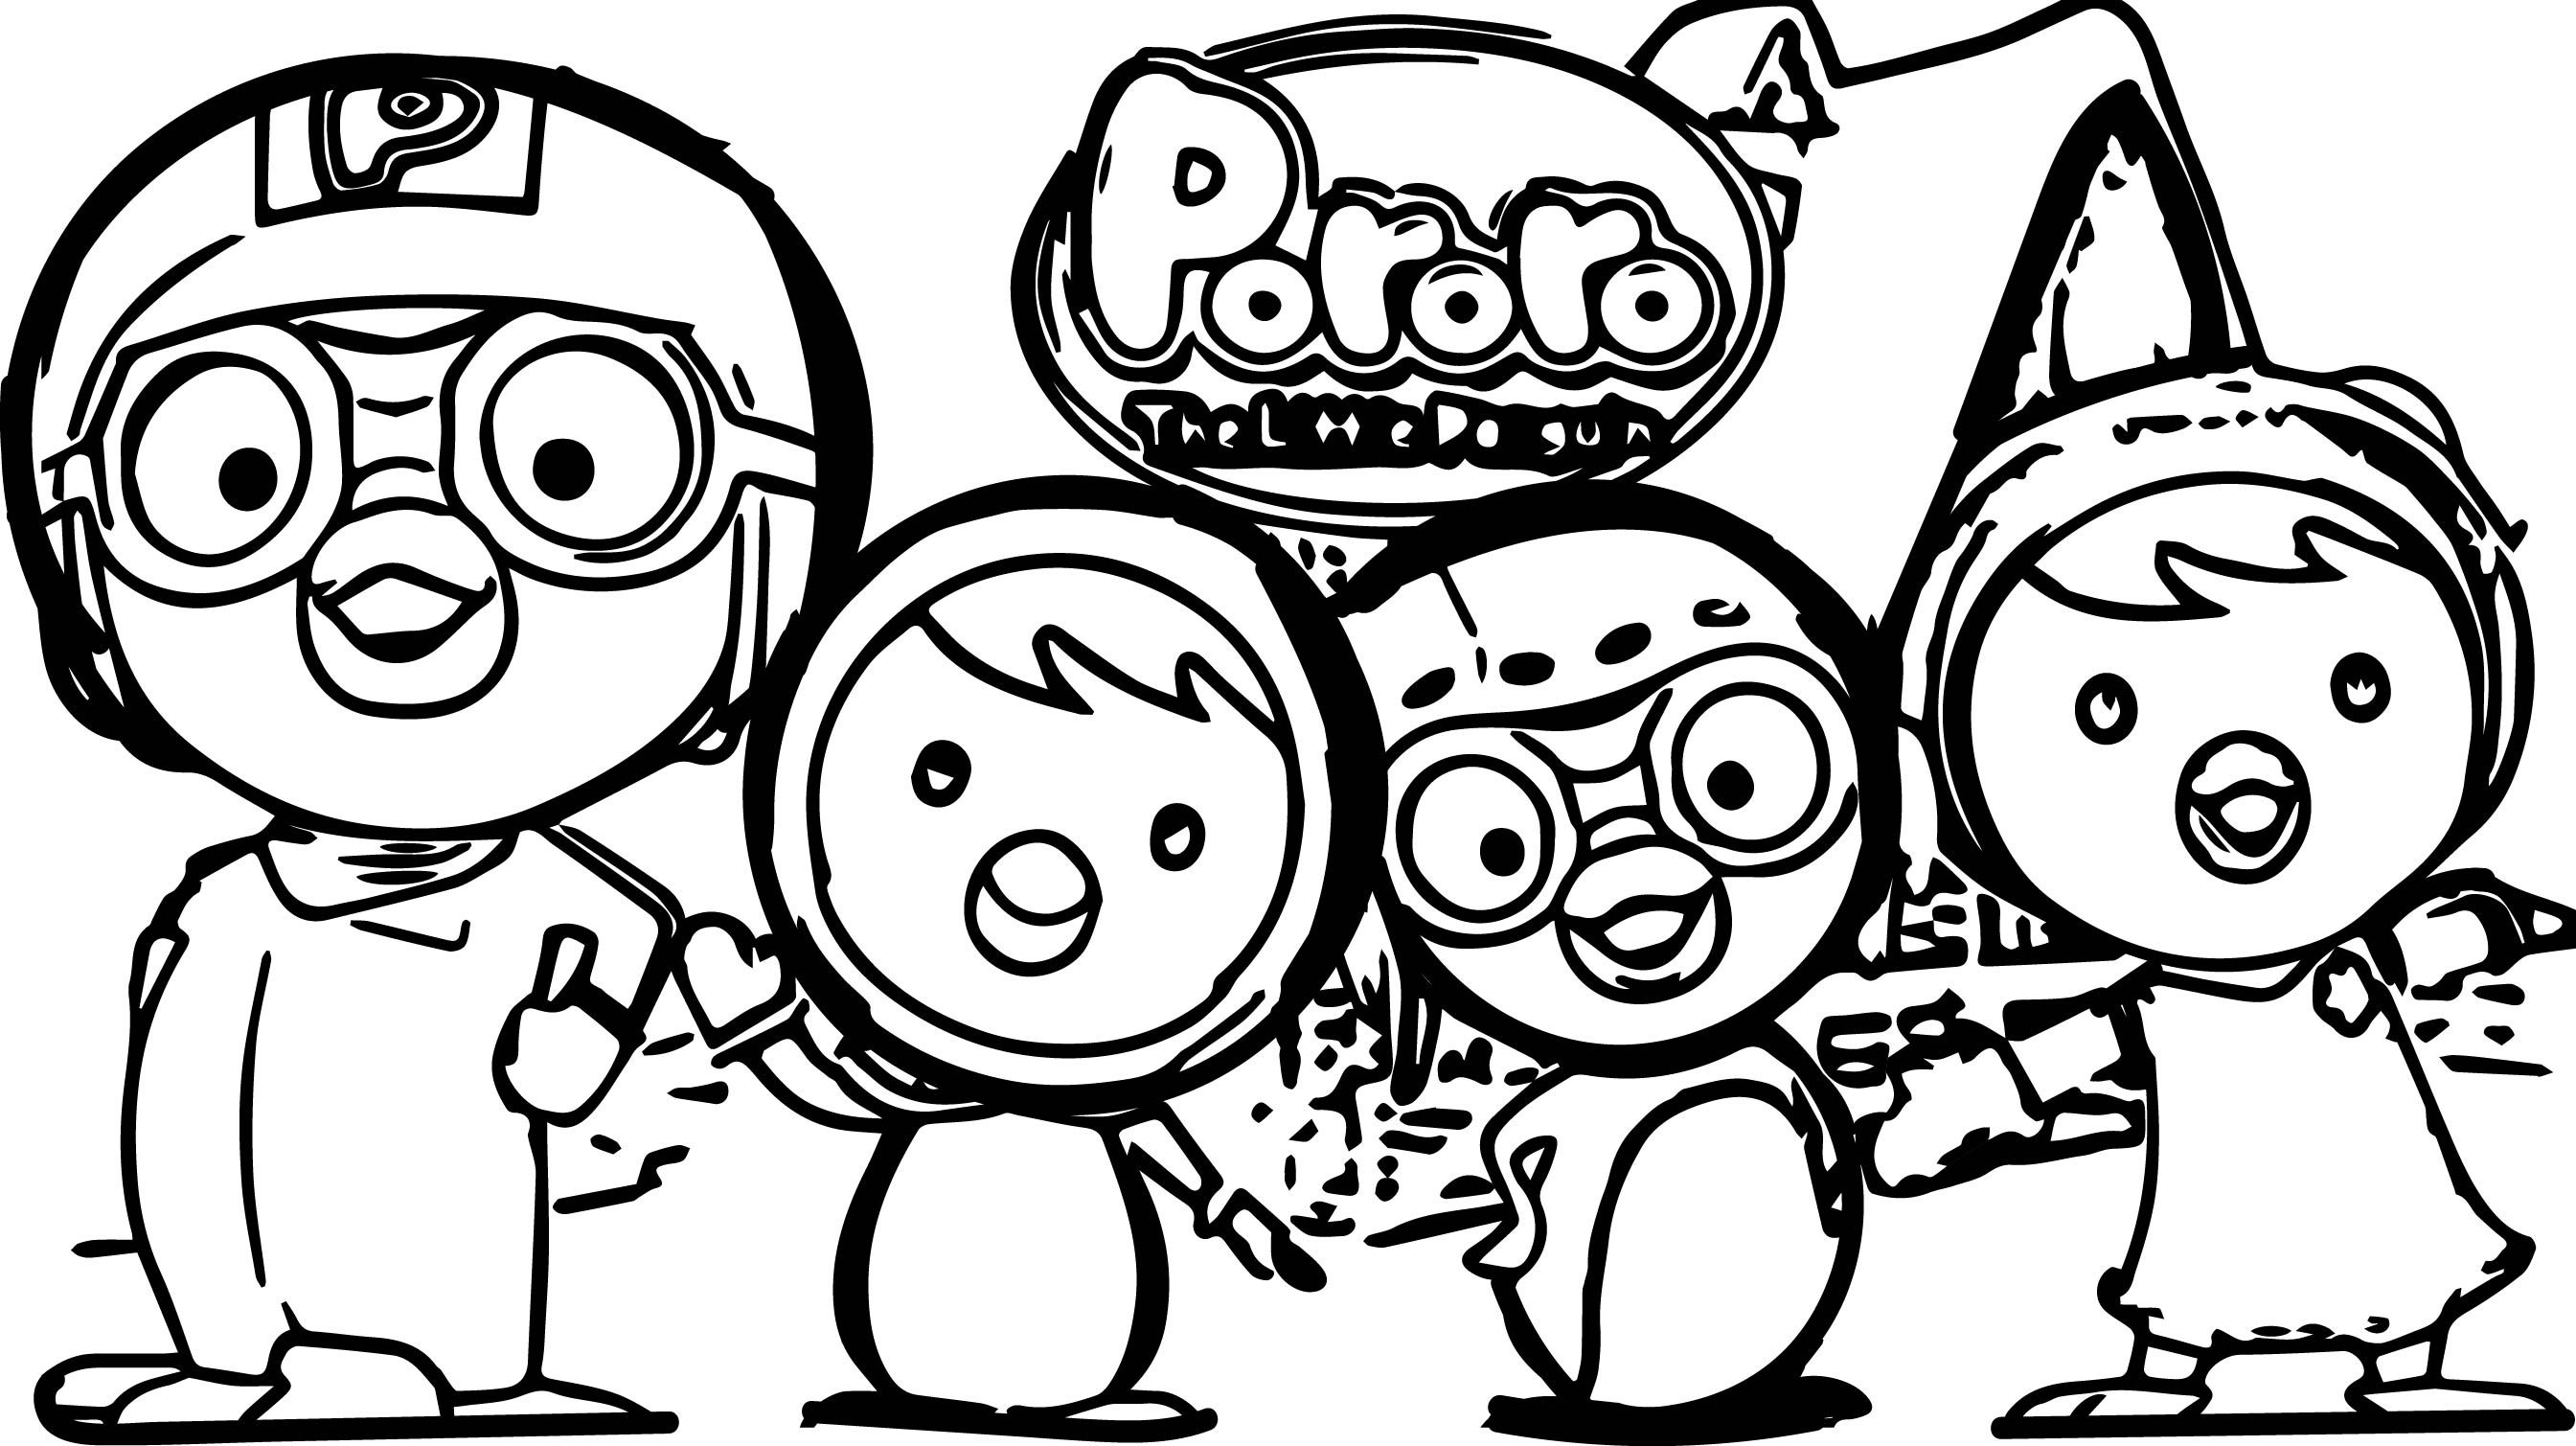 Pororo the main characters coloring page